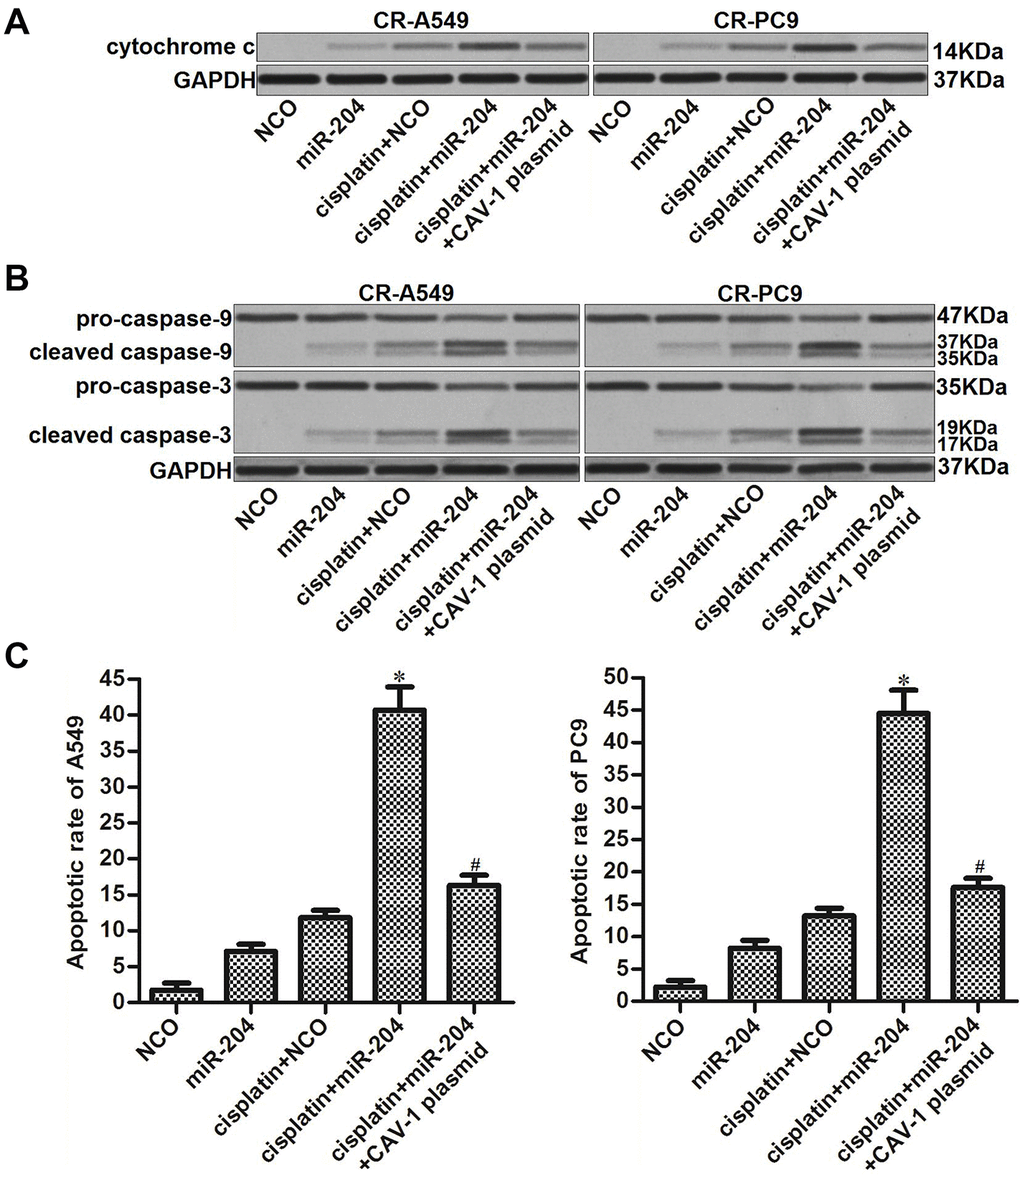 miR-204/CAV-1 axis regulates the mitochondrial apoptosis pathway in cisplatin-resistant NSCLC cells. (A) After mitochondria removal, the protein level of cytochrome c in cytosol was measured using western blot analysis. (B) Cleavage of caspase-9 and caspase-3 in CR-A549 and CR-PC9 cells was detected using western blot analysis. (C) Effect of miR-204 (50 pmol/ml), cisplatin (8 μM), and the CVA-1 plasmid (2 μg/ml) on the apoptotic rate of CR-A549 and CR-PC9 cells. *P vs. Cisplatin+NCO group. #P vs. Cisplatin+miR-204 group.